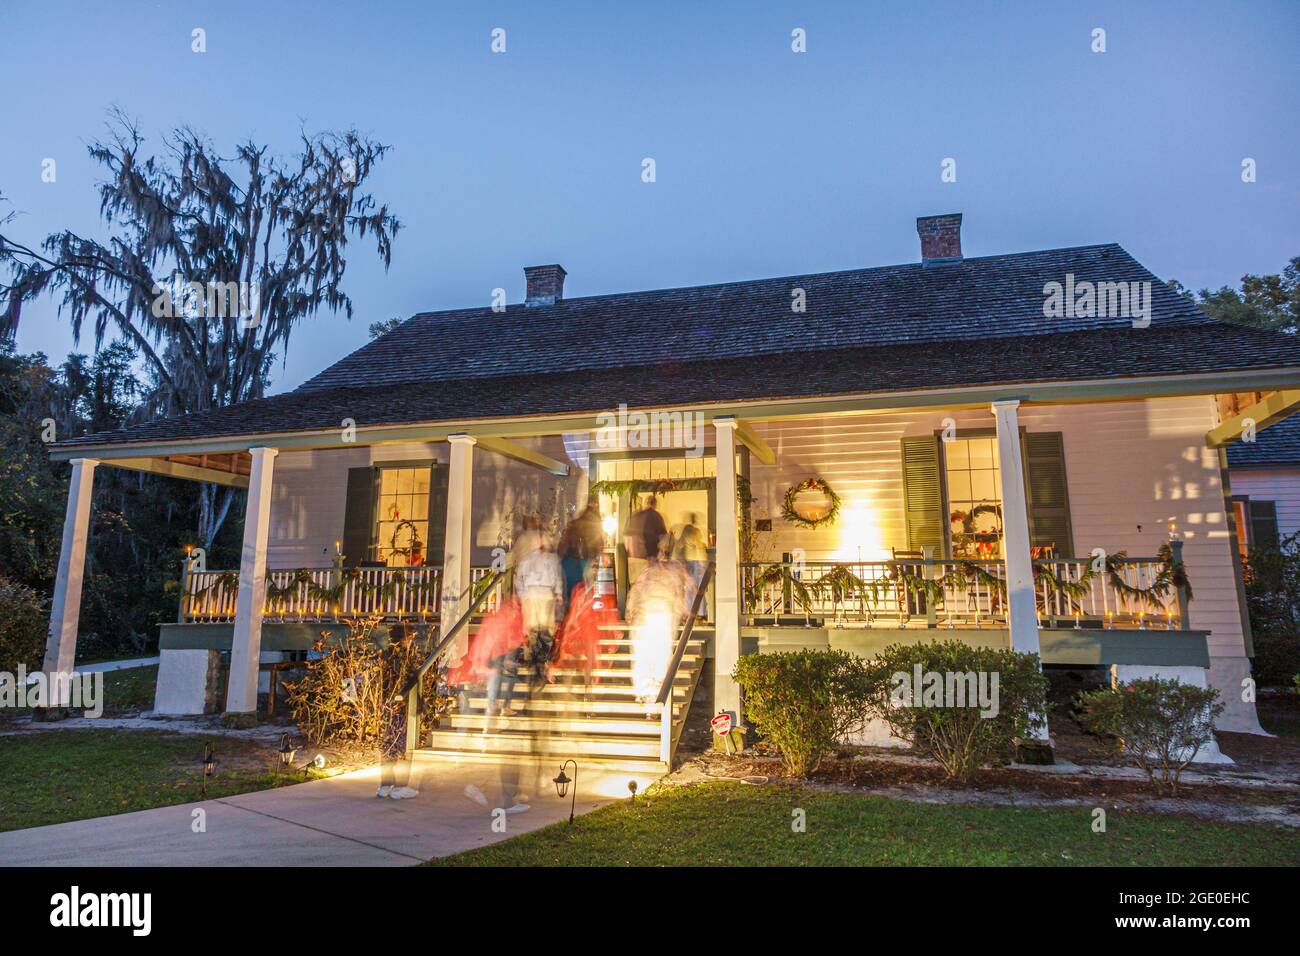 Florida Gainesville Haile Homestead Plantation House,Candlelight Visits front entrance outside exterior evening night, Stock Photo